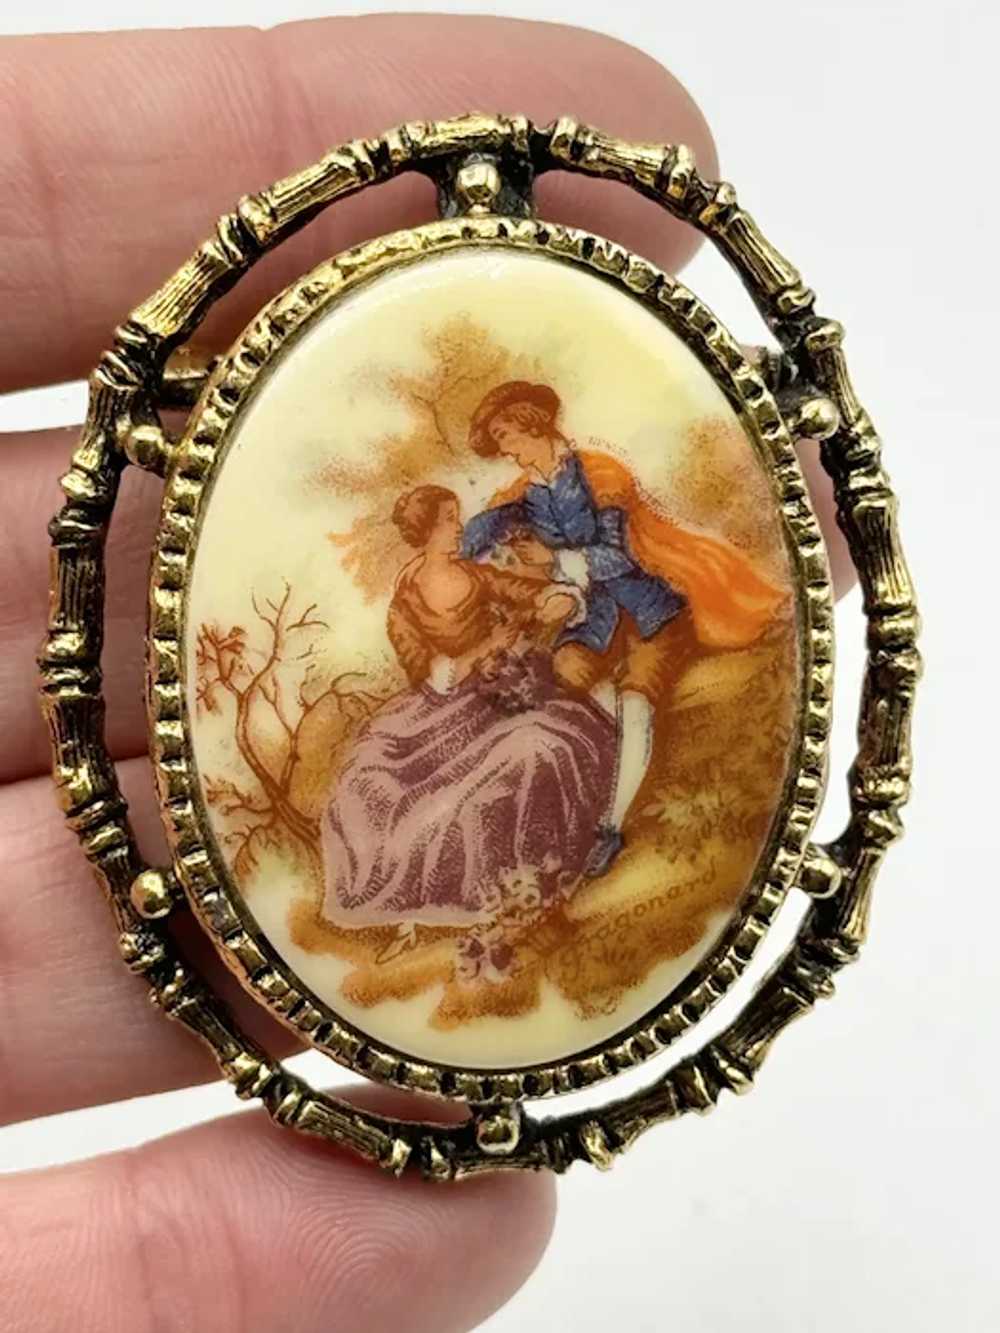 Vintage bamboo style art portrait brooch pin - image 3